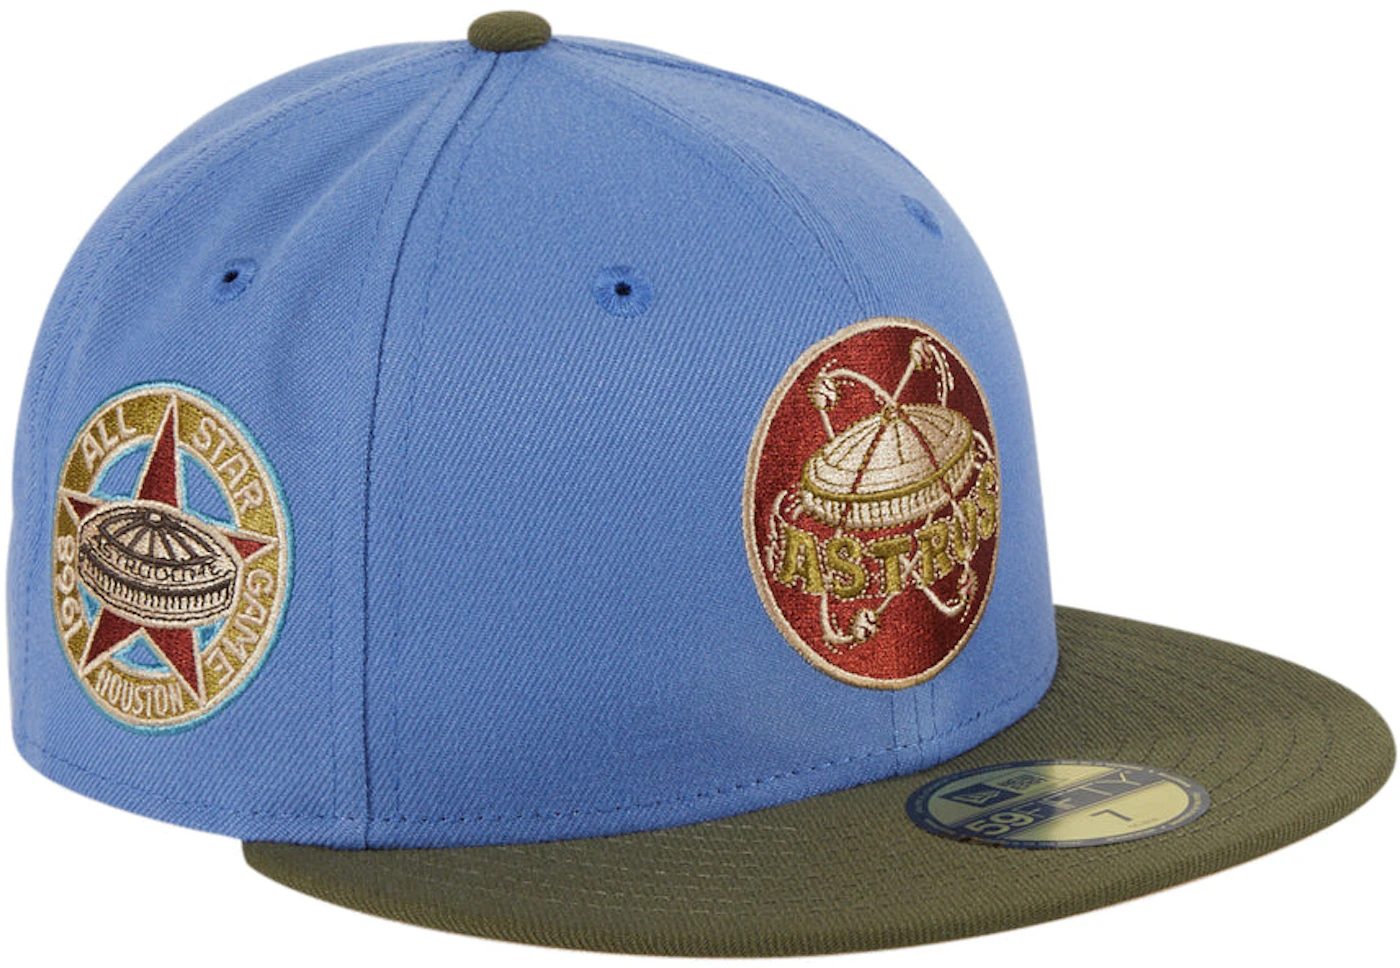 New Era Houston Astros Great Outdoors 1968 All Star Game Patch Hat